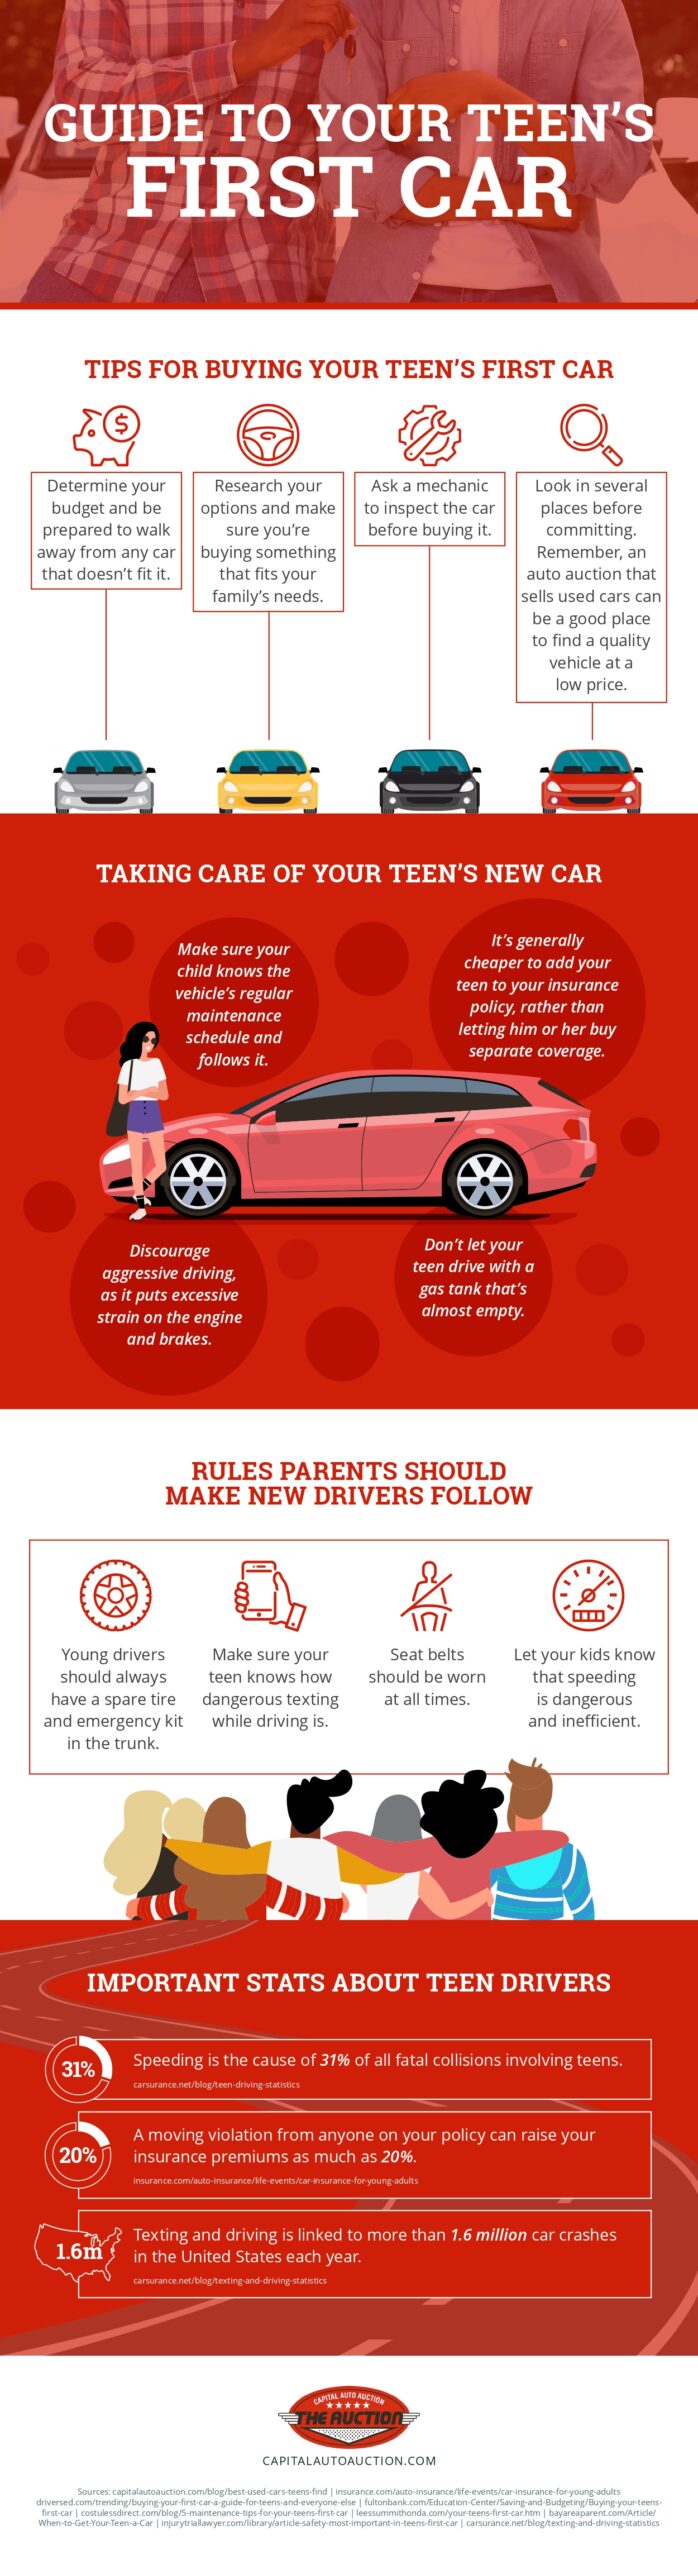 Guide To Your Teen’s First Car